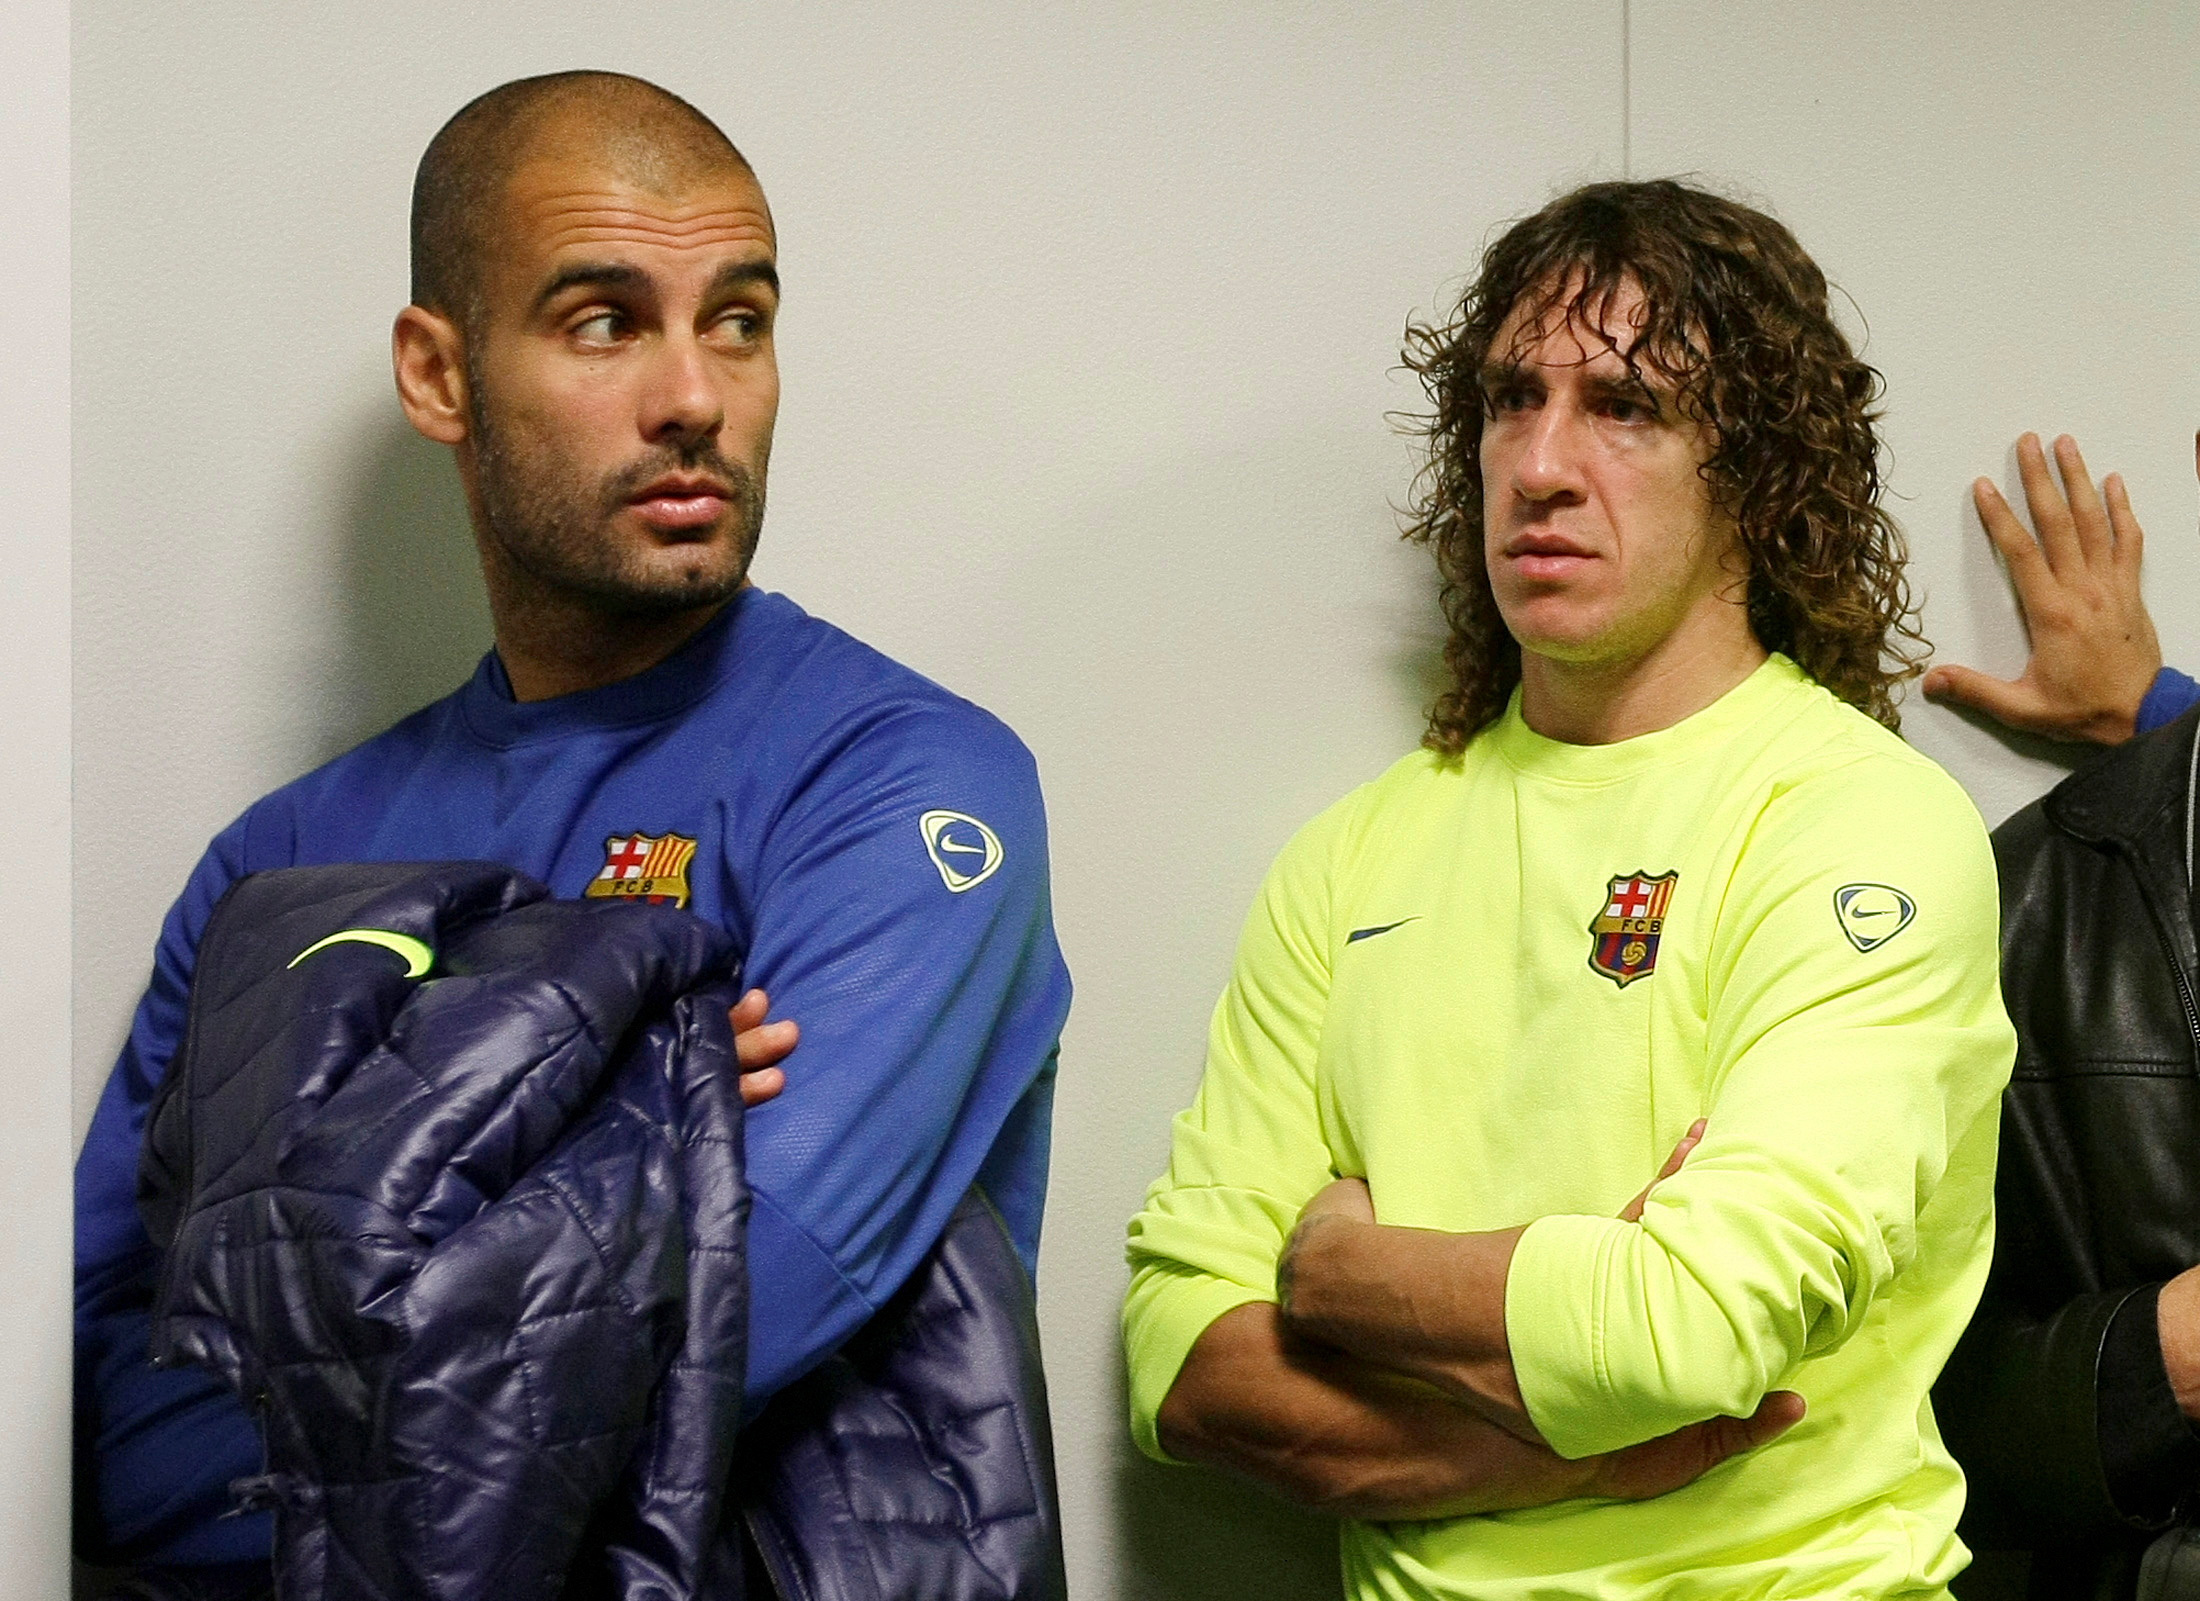 Barcelona's coach Guardiola gestures near captain Puyol in the news room during the presentation of a book of Barcelona's youth coach Puig in Sant Joan Despi